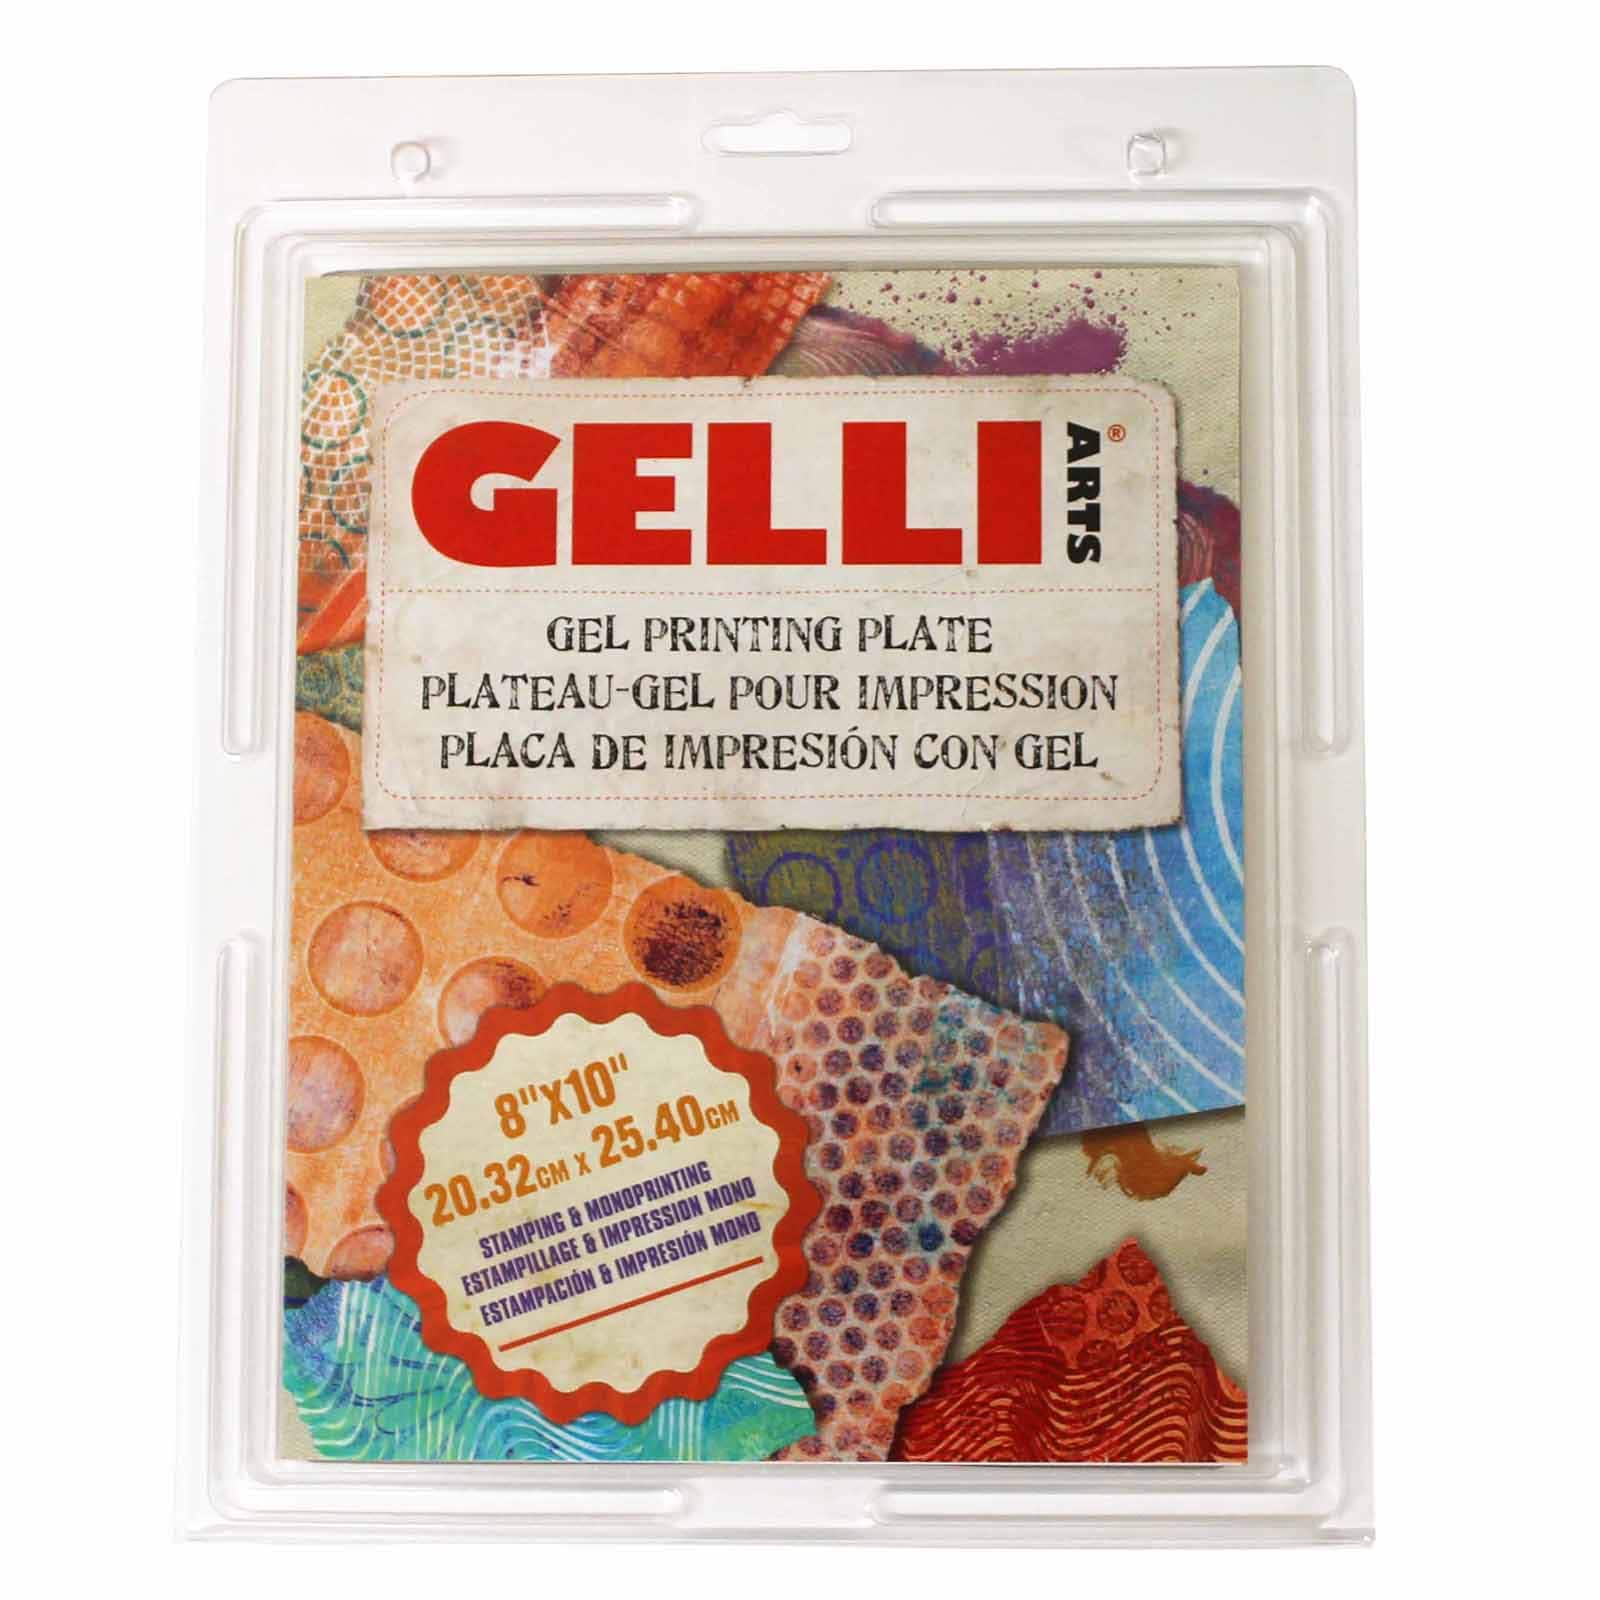 NYC: Printmaking with a Gelli Plate Workshop (Kit Included) - Team Building  Activity